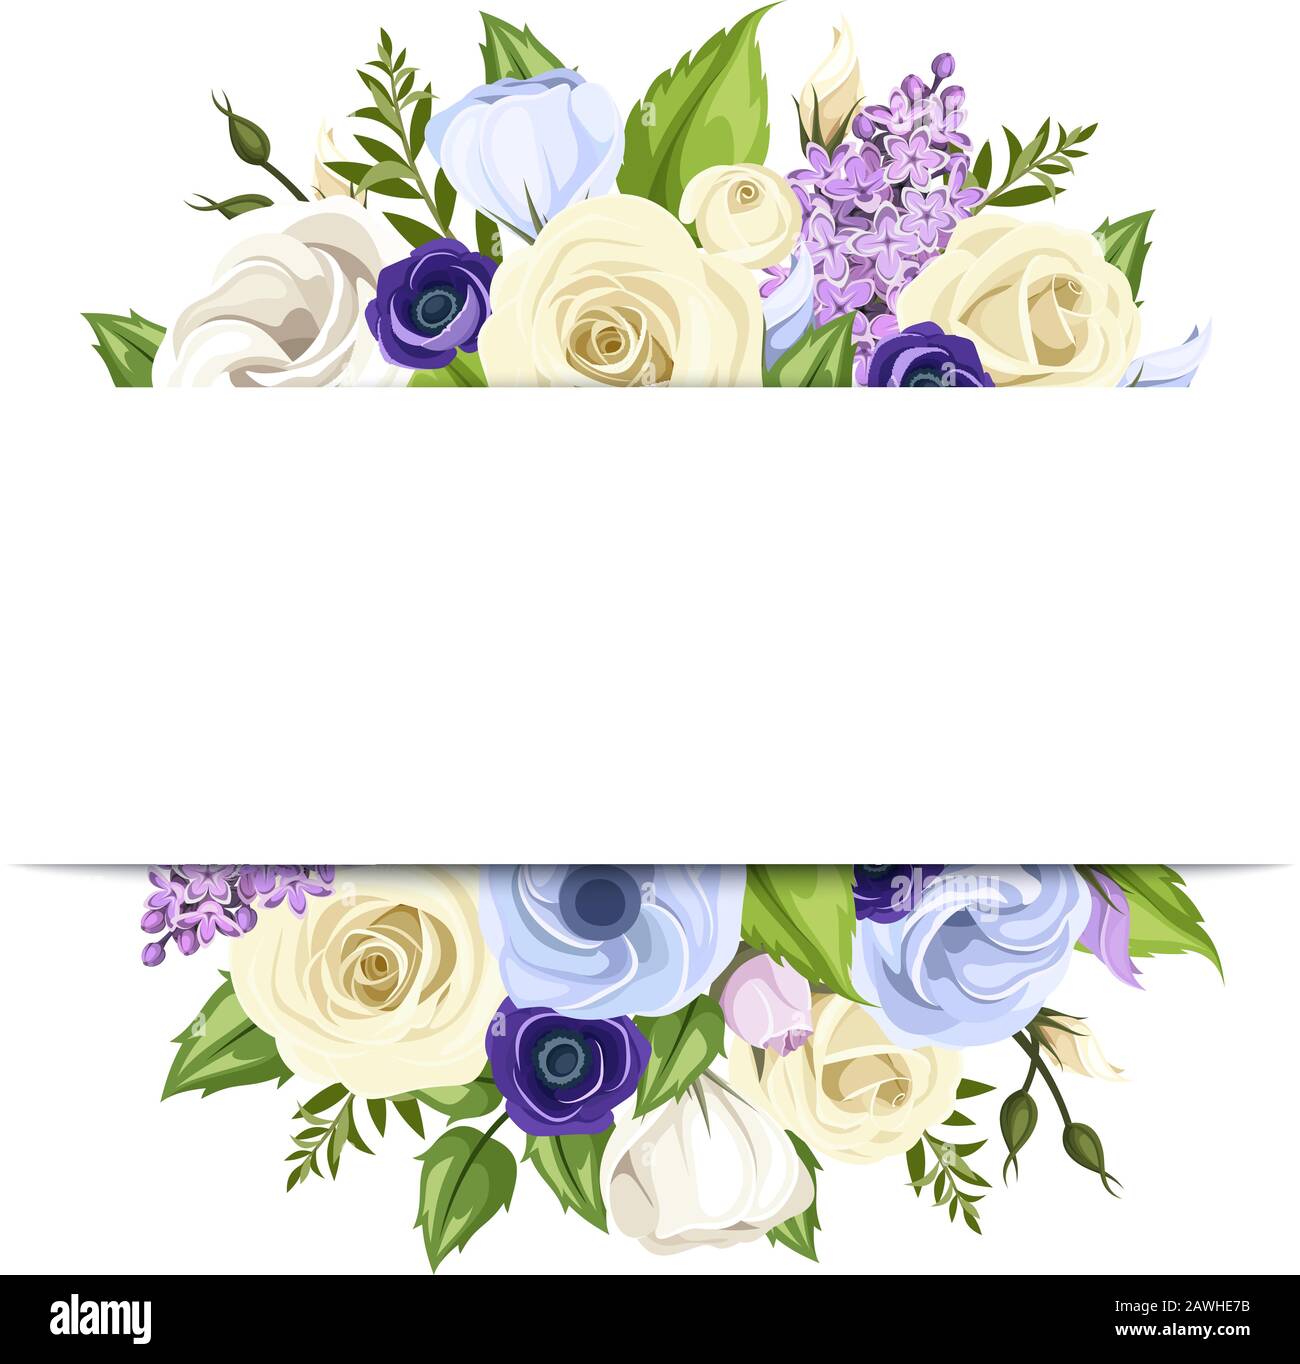 Vector banner with blue, purple and white roses, lisianthuses, anemones, lilac flowers and green leaves. Stock Vector